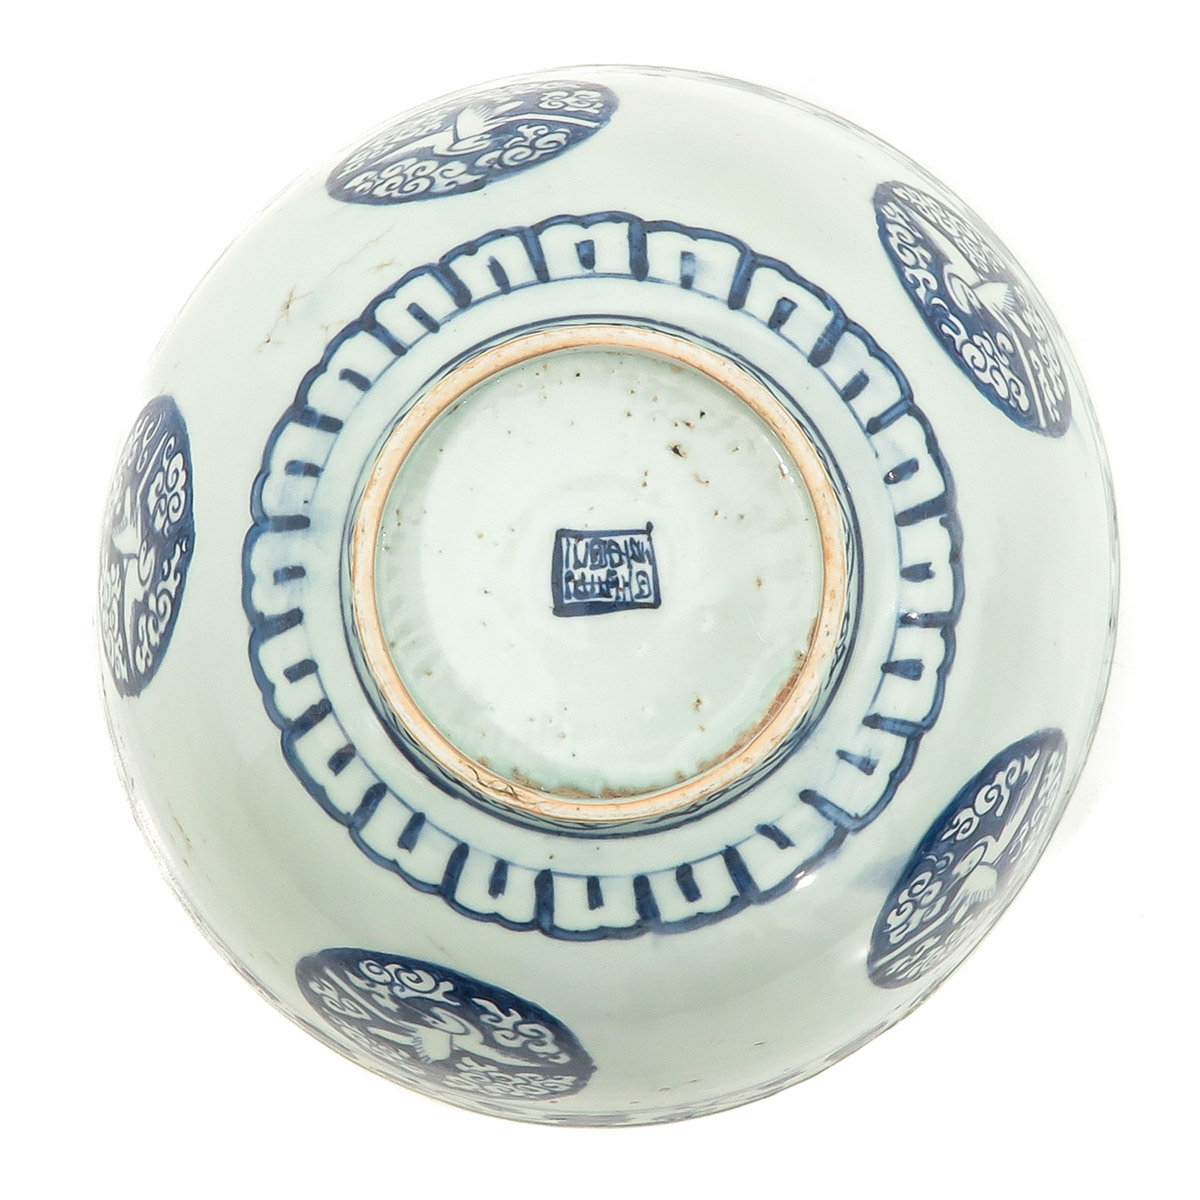 A Blue and White Serving Bowl - Image 6 of 9